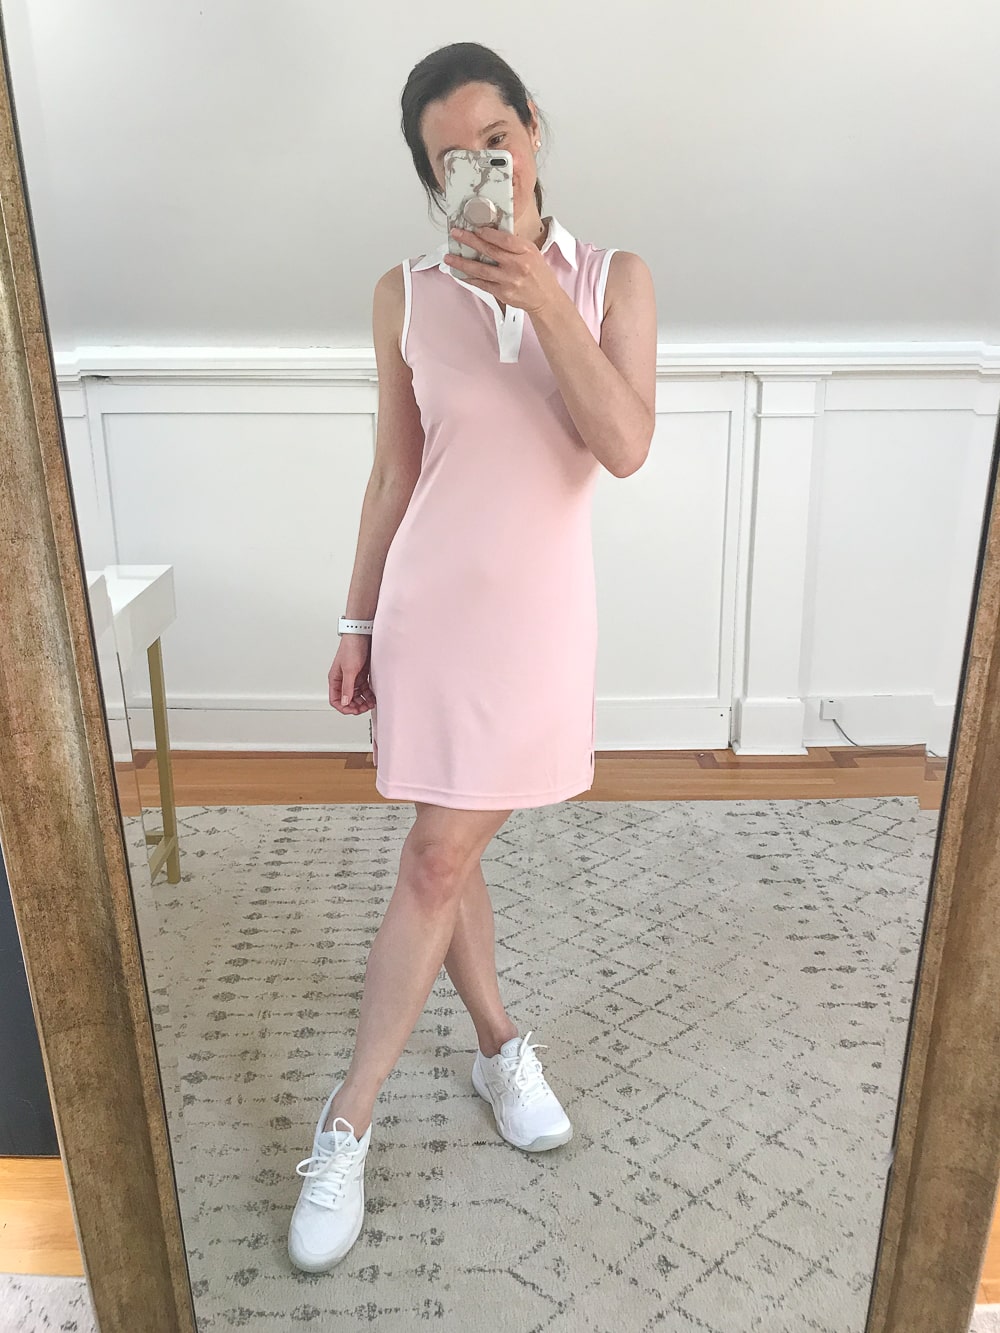 Pink polo tennis dress tried on by affordable fashion blogger Stephanie Ziajka on Diary of a Debutante